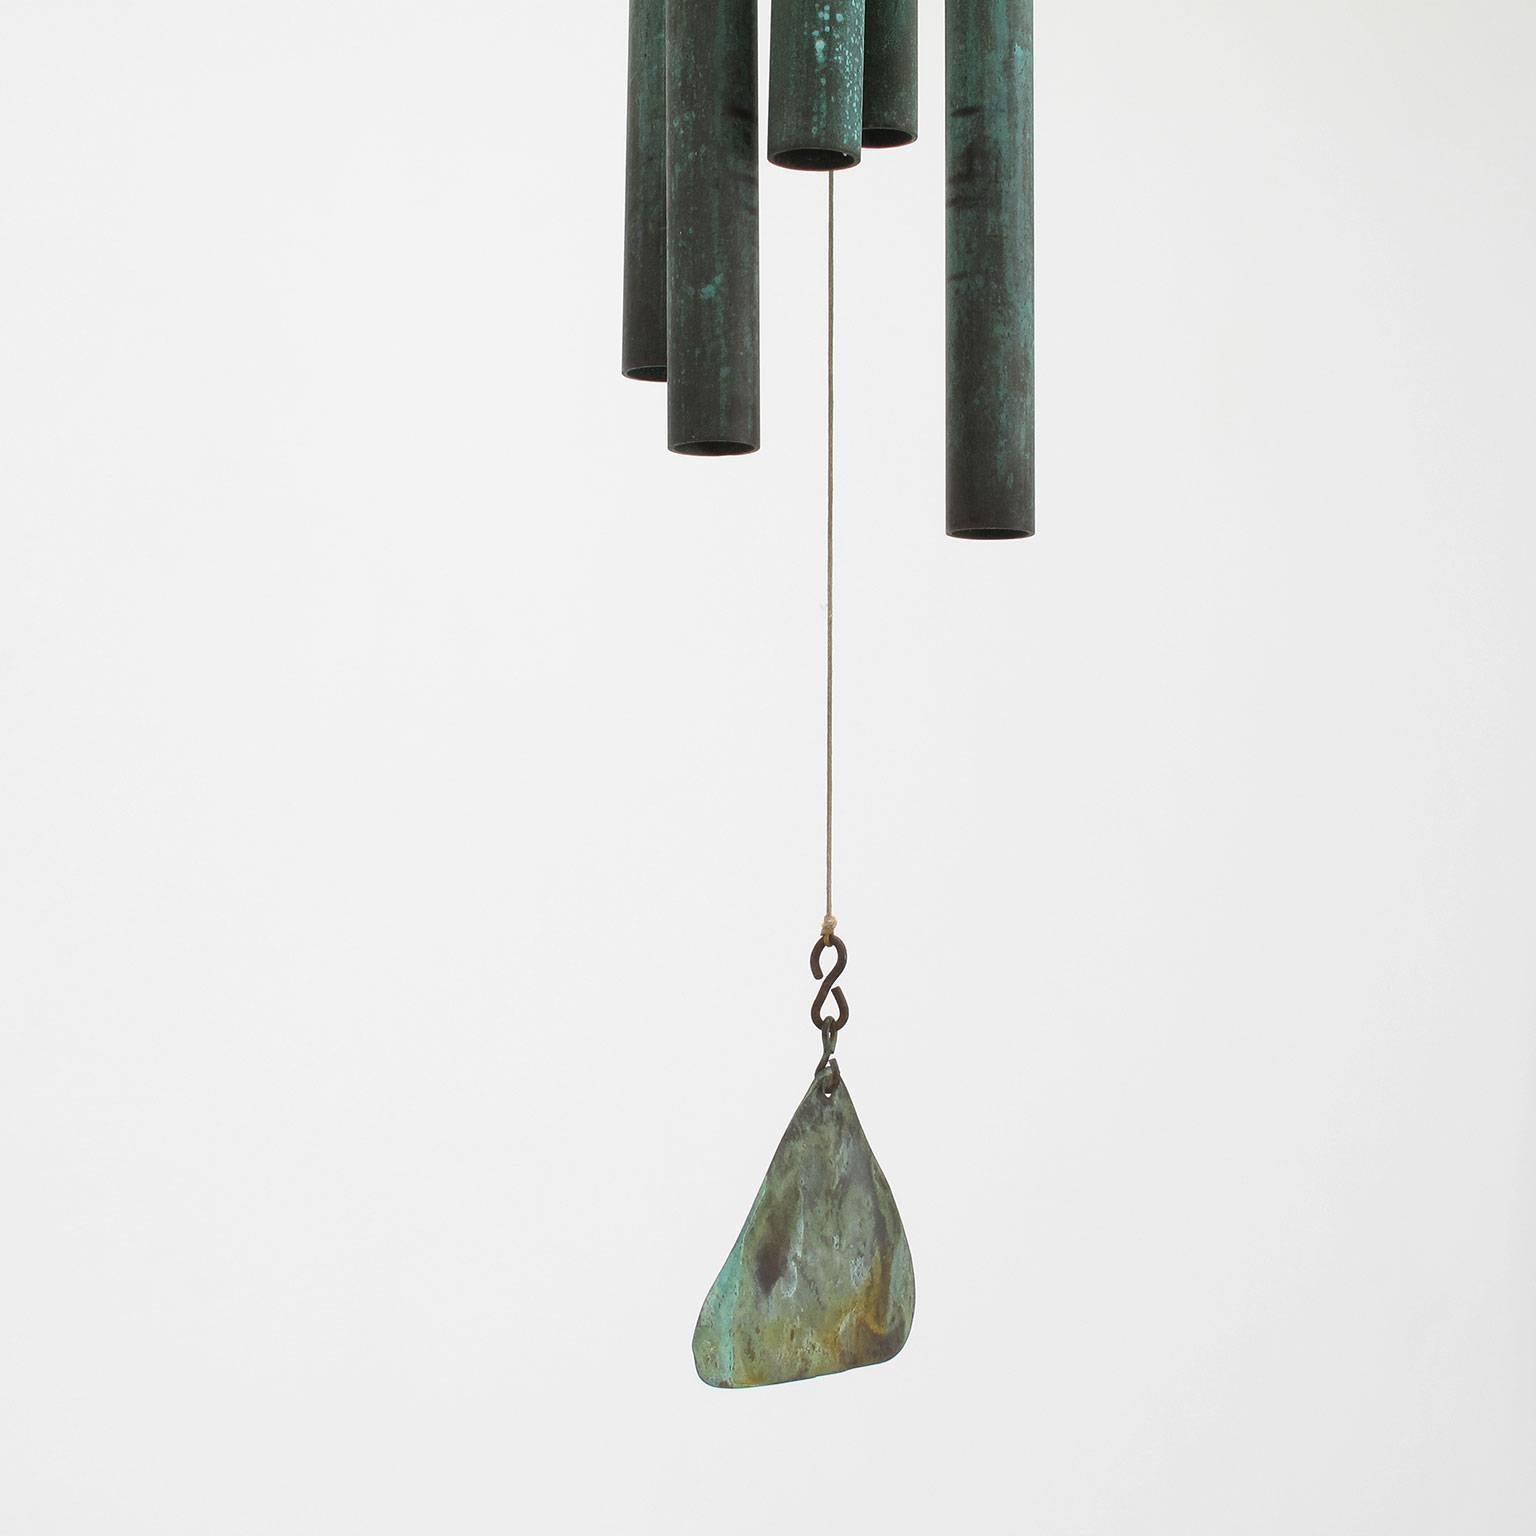 20th Century Modernist Solid Brass Wind Chimes